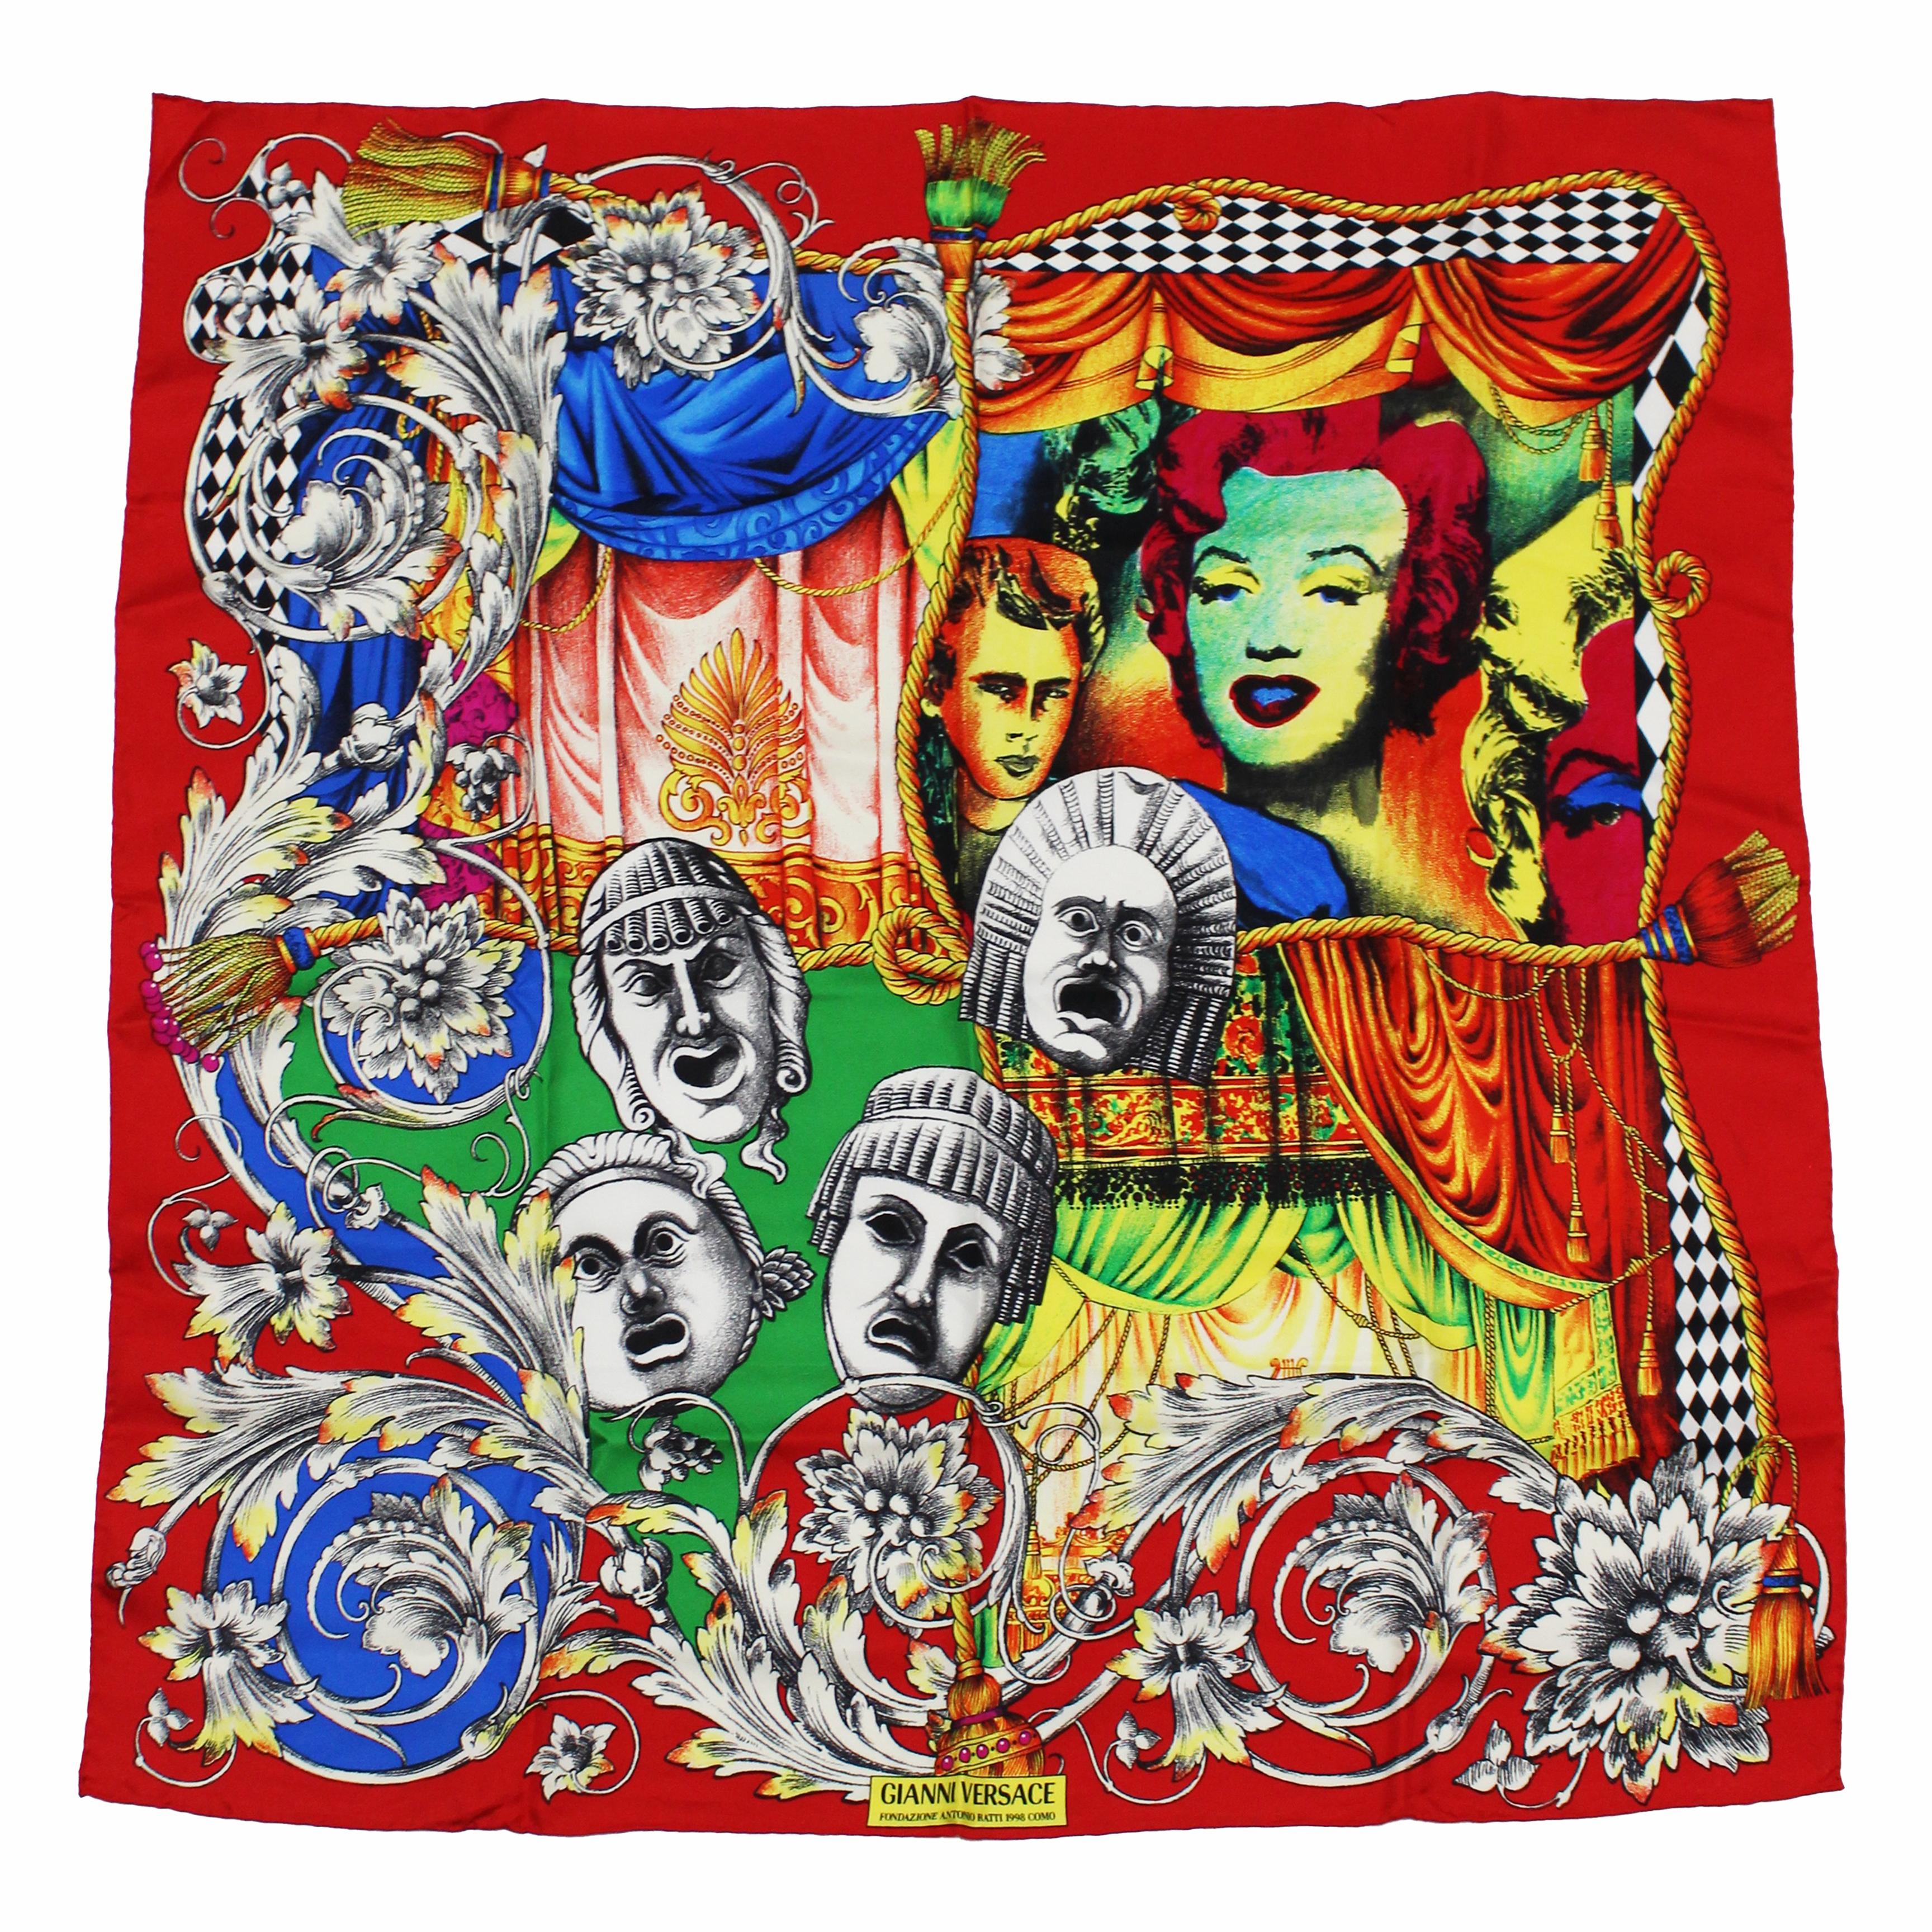 Authentic, preowned, vintage & RARE Versace Fondazione Antonio Ratti Silk Scarf or Shawl from 1998. Made from a fine silk twill fabric, this scarf features Versace's iconic pop art images of Marilyn Monroe and James Dean, as well as several Roman